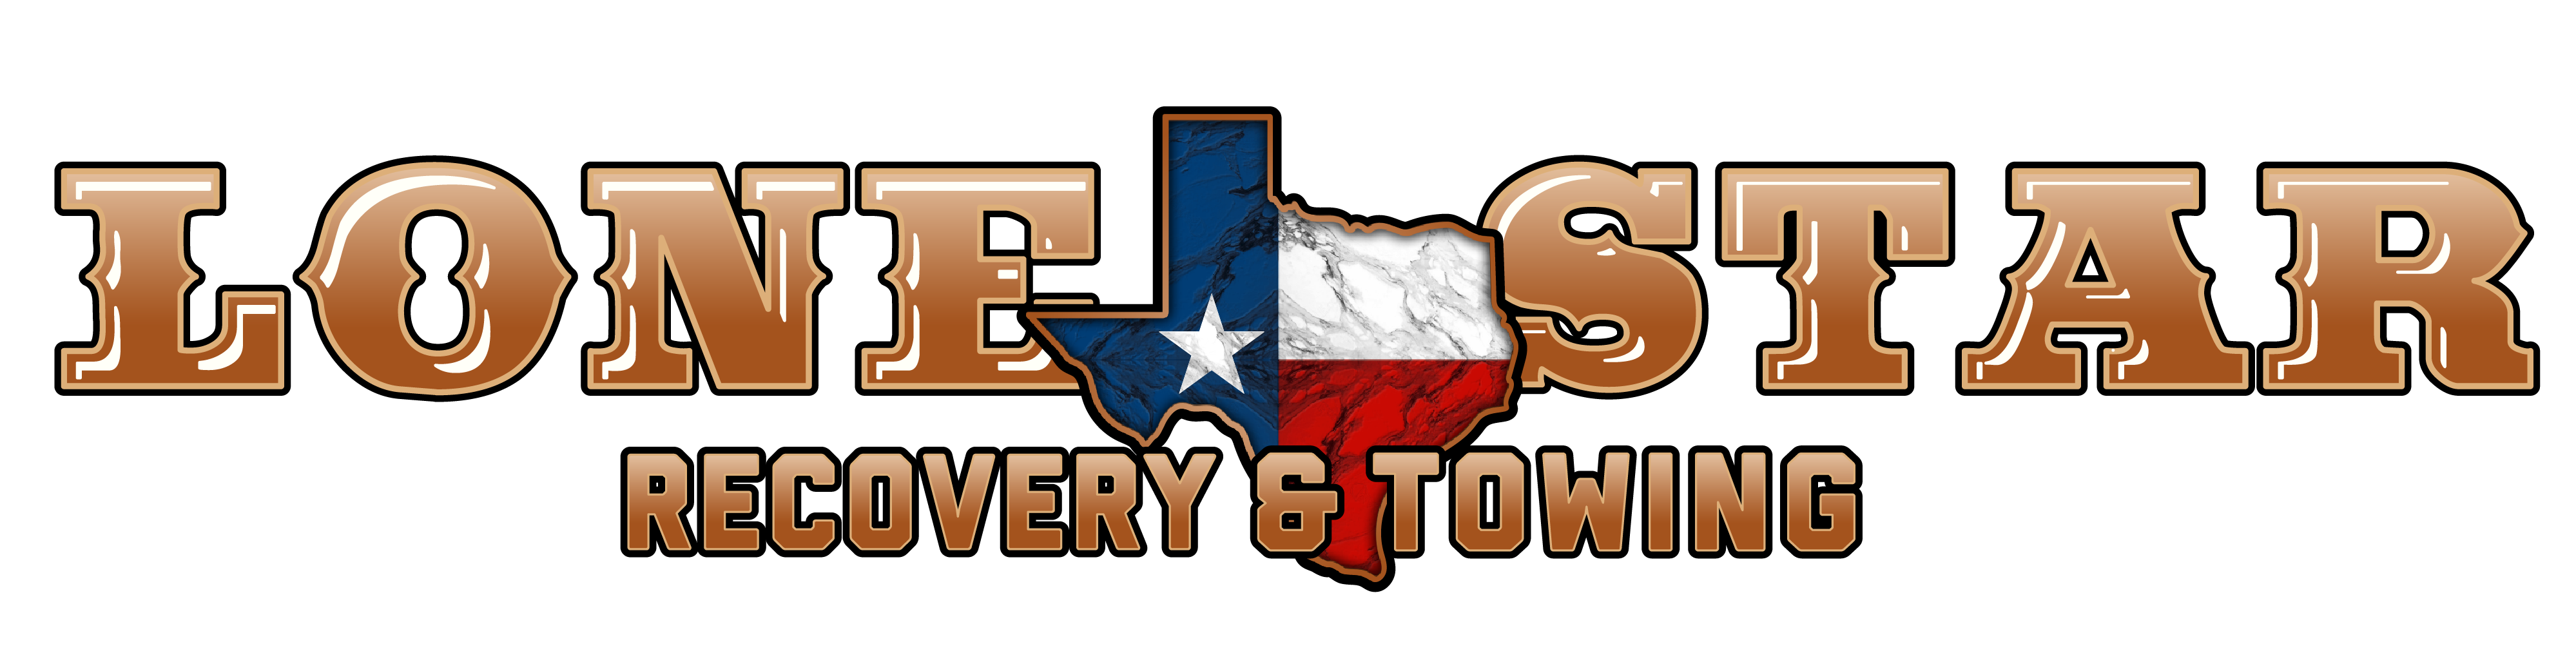 Lonestar Recovery & Towing LLC | SAN ANGELO/TEMPLE TX